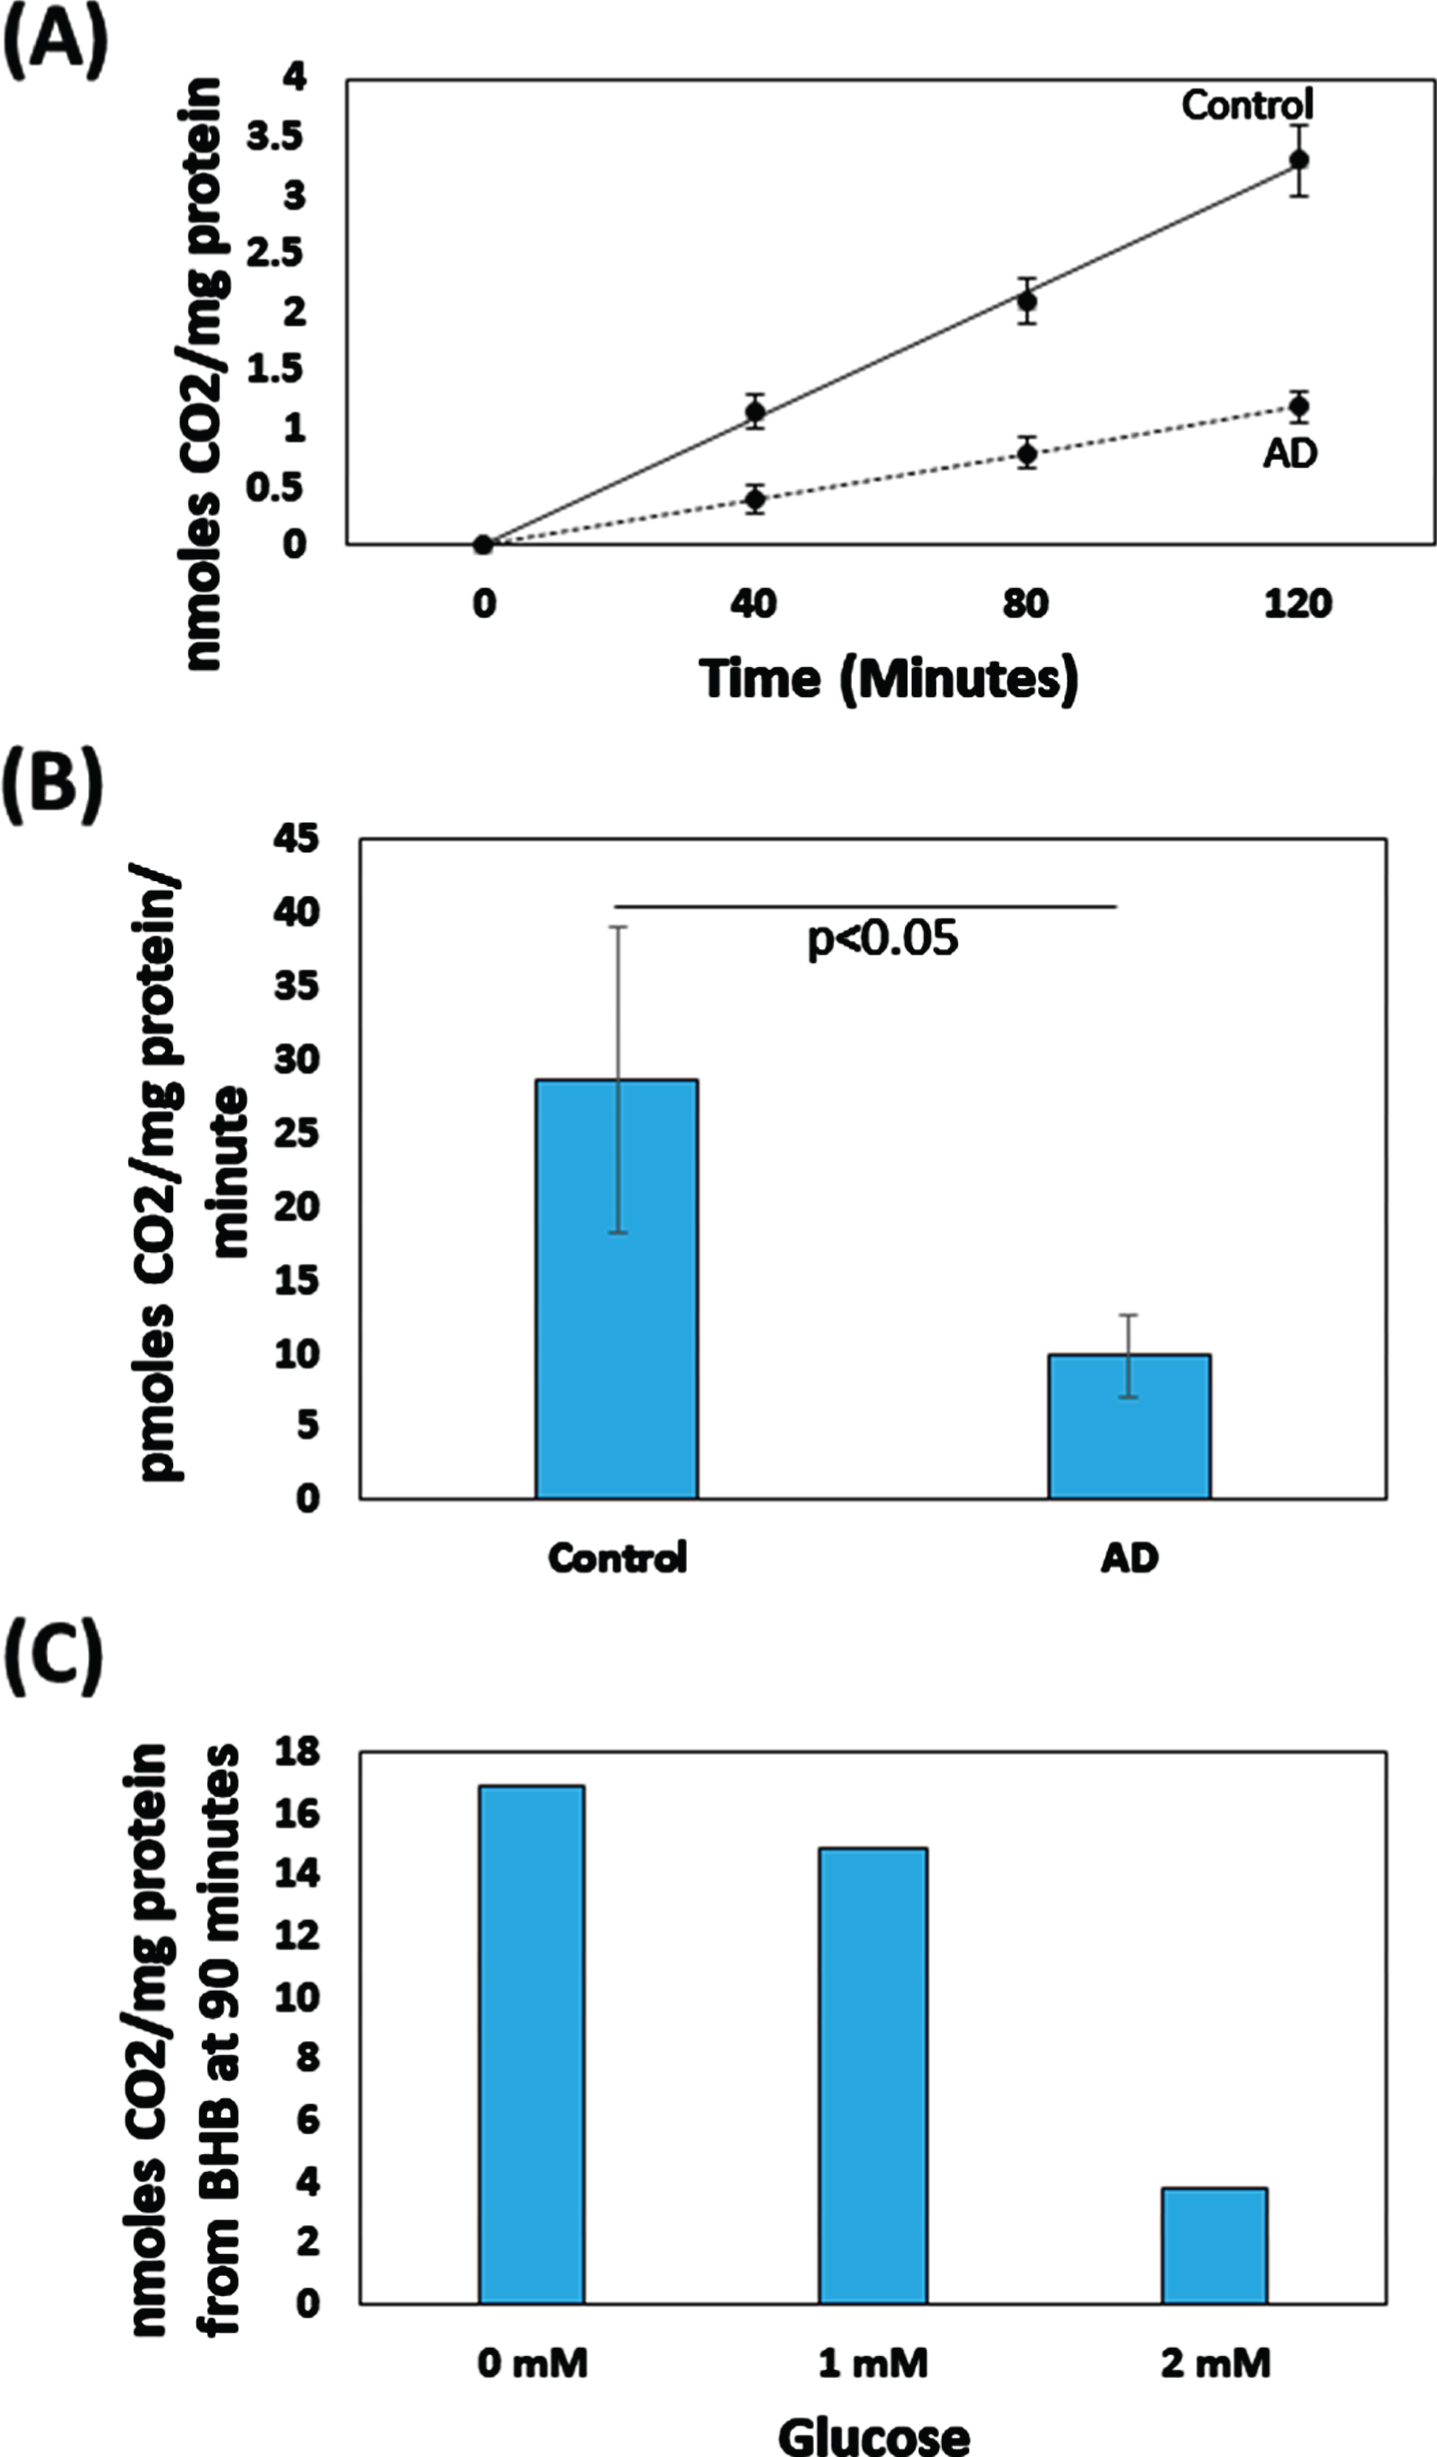 BHB-derived CO2 production by AD and control brain homogenates. A) For both groups CO2 production was essentially linear over 120 min. The assayed homogenates contained 1.25 mM NAD + and 1.25 mM ATP; no exogenous glucose was added. B) The CO2 production rate was lower in the AD brains. The assayed homogenates contained 1.25 mM NAD + and 1.25 mM ATP; no exogenous glucose was added. C) For one assessed control brain, adding 1 mM glucose appeared to slightly lower BHB-derived CO2 production, while adding 2 mM glucose appeared to dramatically lower BHB-derived CO2 production. In addition to providing exogenous glucose, the experiment shown in 2C was performed in the presence of 2.5 mM NAD + and 2.5 mM ATP.